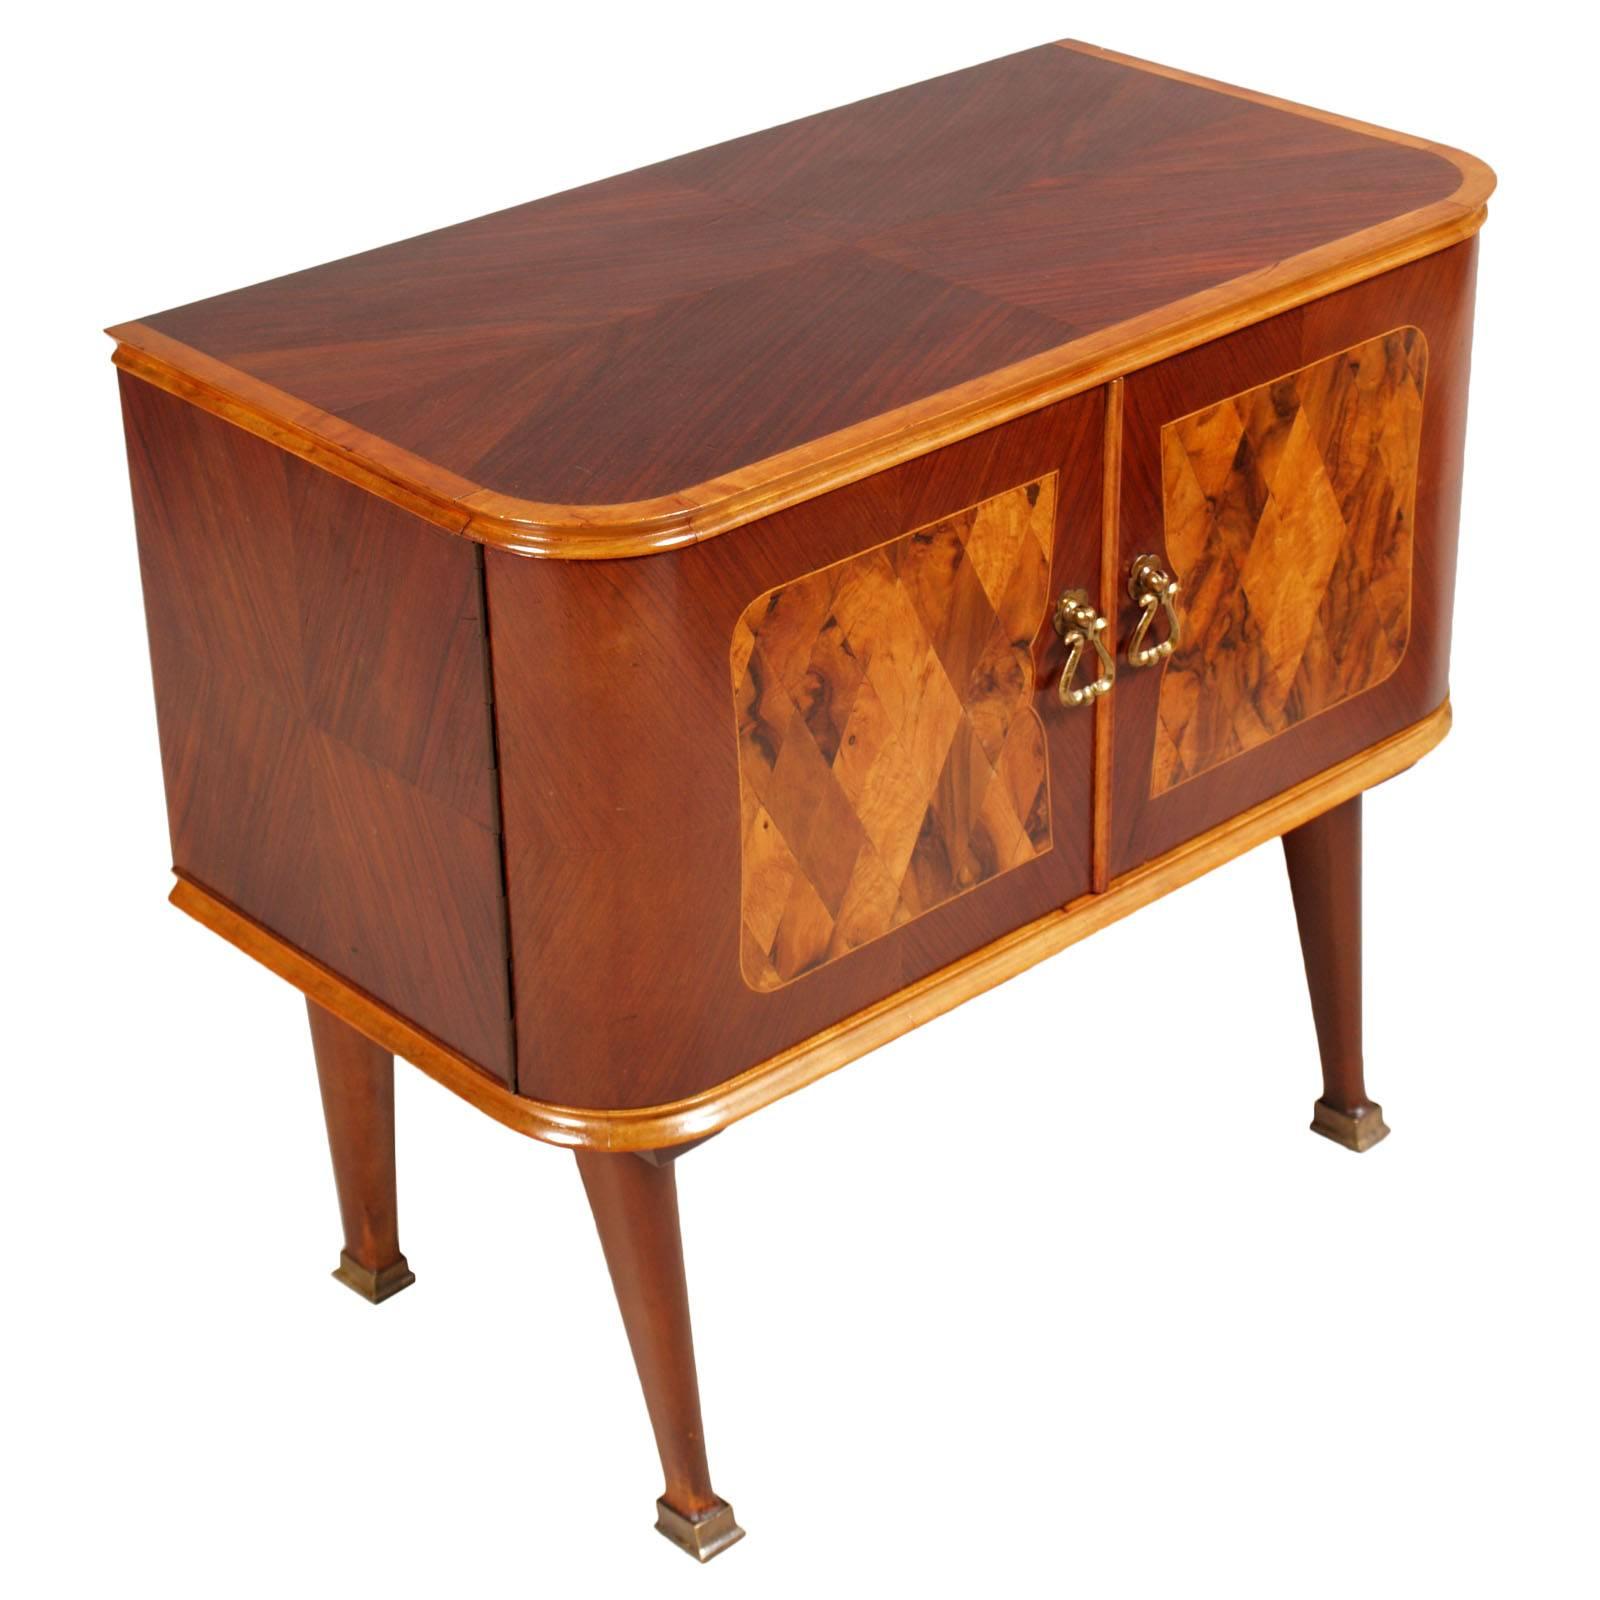 Art Deco 1930s bedside table in walnut, veneer and burl walnut inlaid, Paolo Buffa design attributed, with originals golden bronze accessories. Very beautiful and unobtainable.
Conzorzio Esposizione Mobili Cantù
Measures cm: H 54, W 62, D 33.
Only a